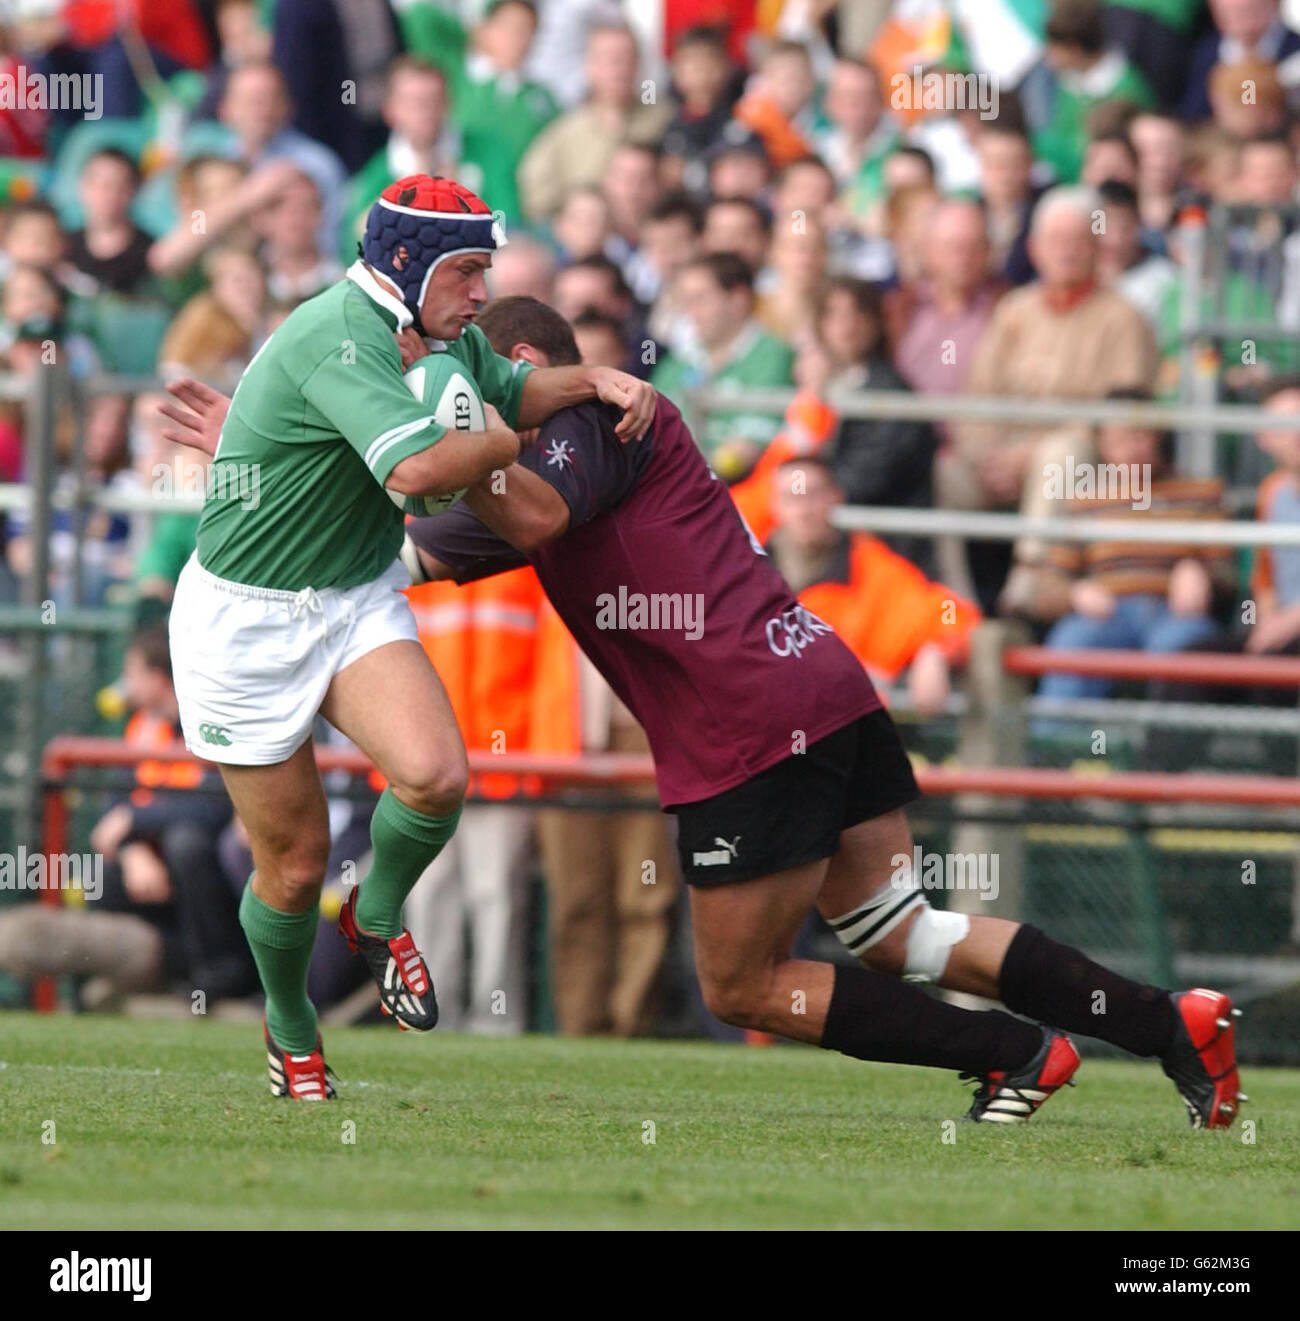 Ireland's David Humphreys against Georgia in his 46 cap, equaling Jackie Kyle's outhalf record, in the rugby world cup qualifier at Lansdowne Road. Stock Photo